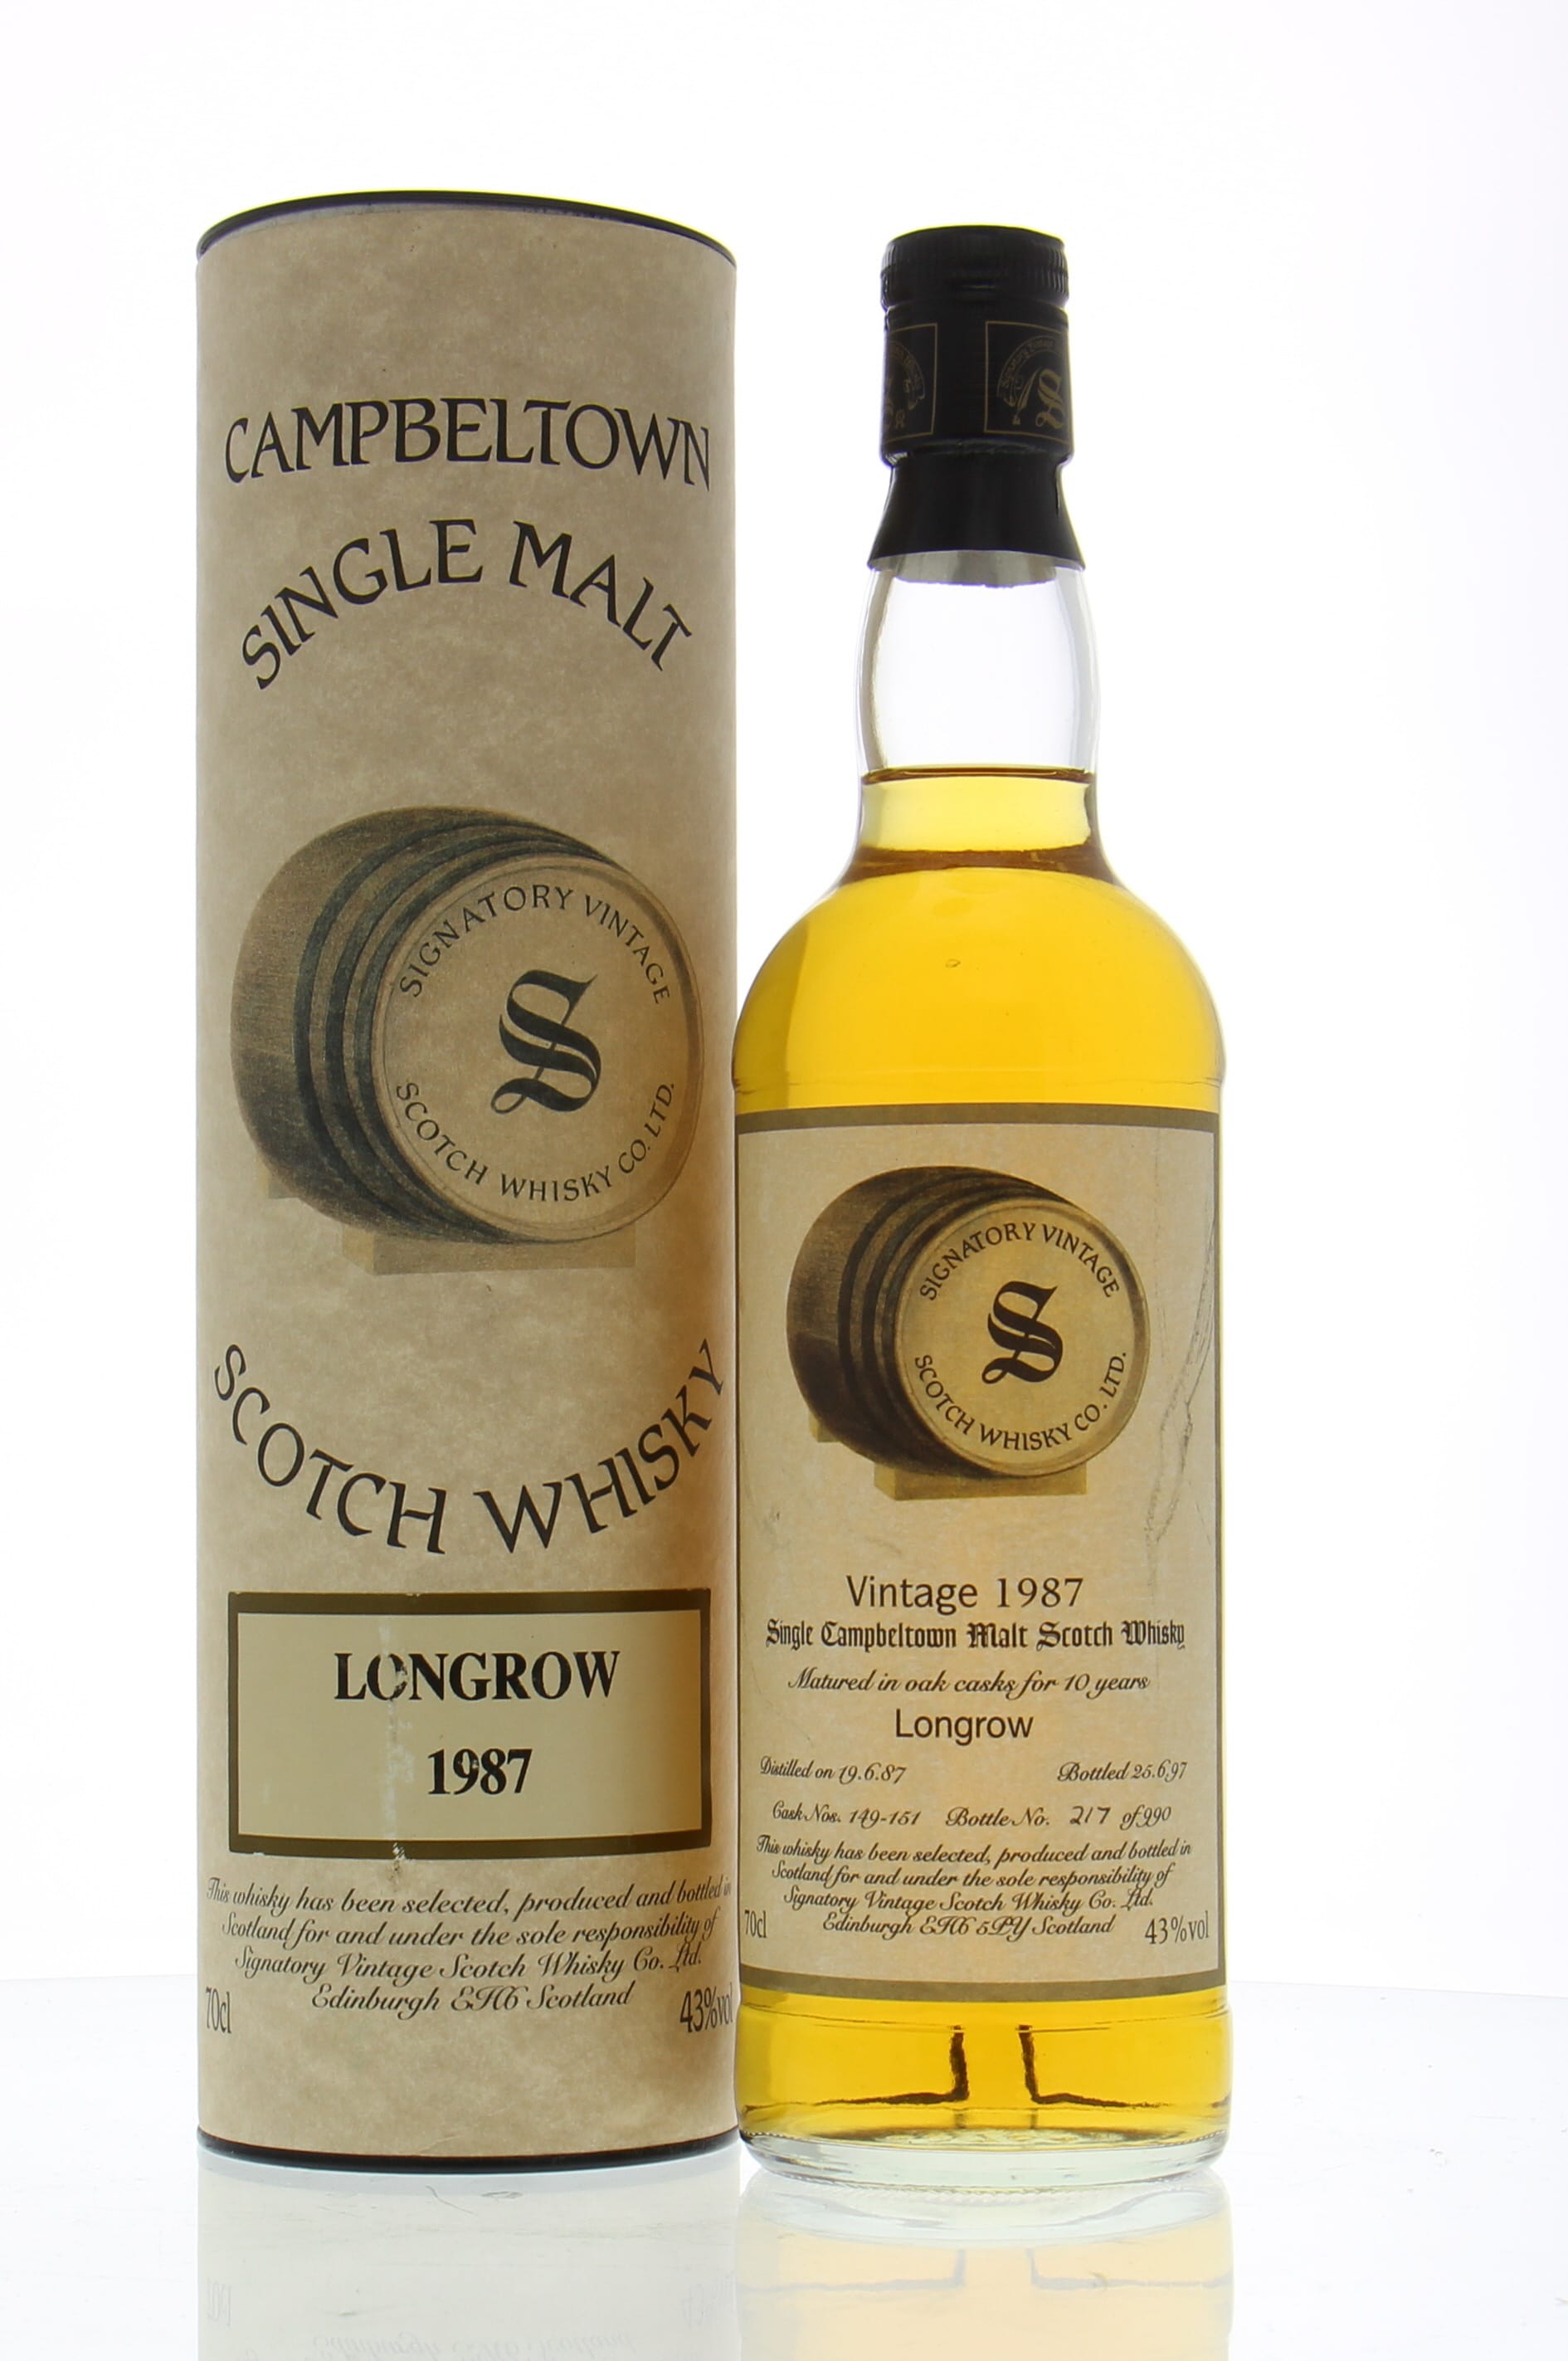 Longrow - 10 Years Old Signatory Vintage Cask:149-151 43% 1987 In Original Container